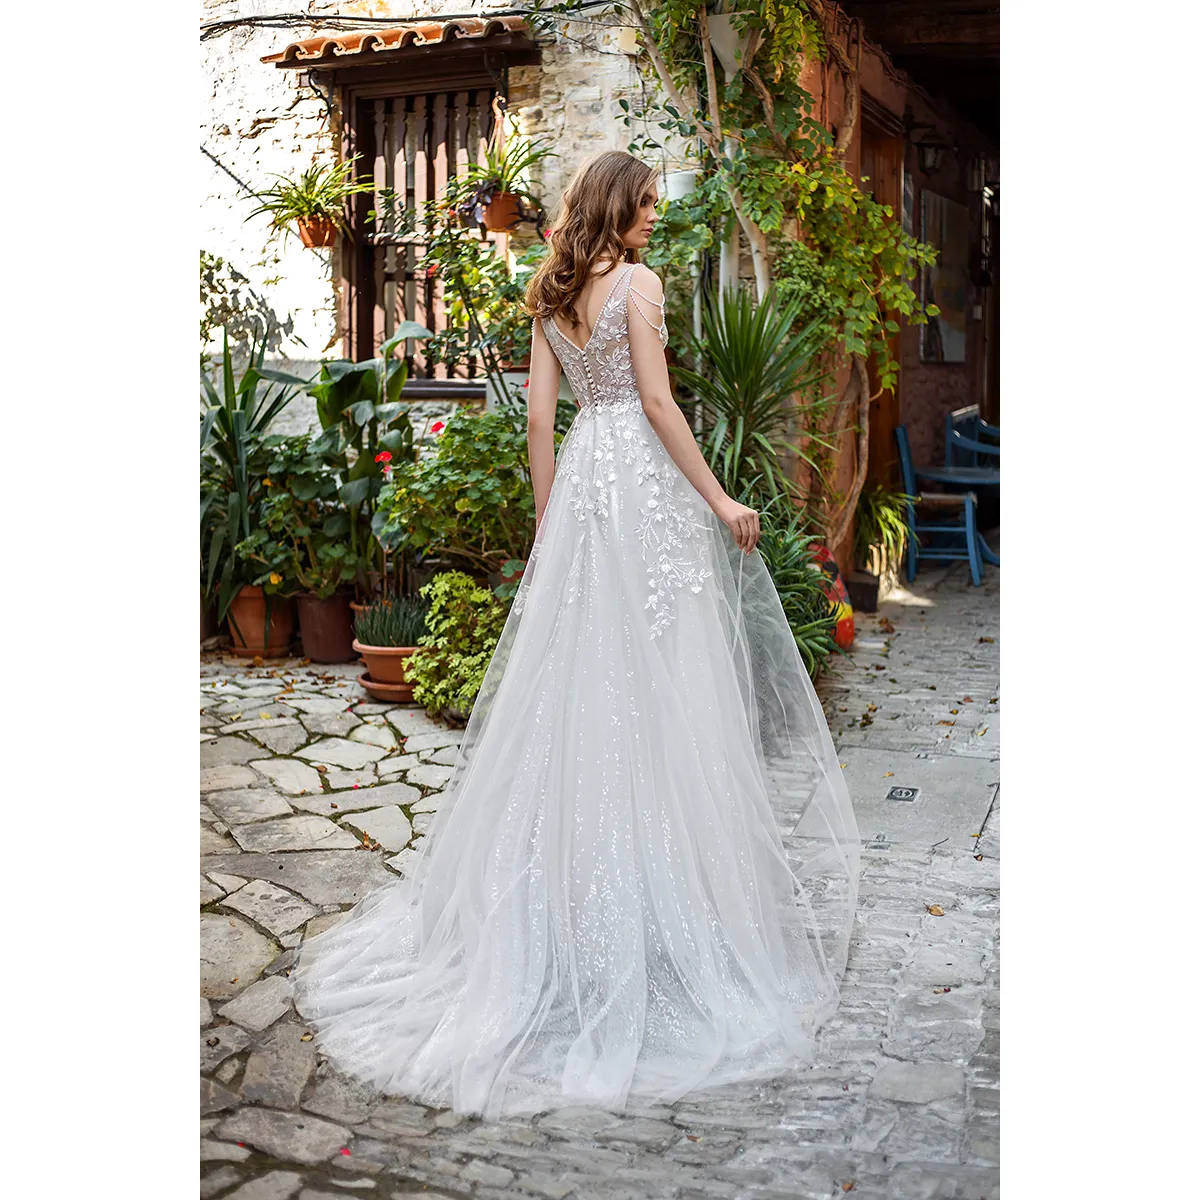 Imported Russian corsage wedding dress Estelavia "Kiara", bohemian style, laced tulle skirt, pearls falling from the shoulders